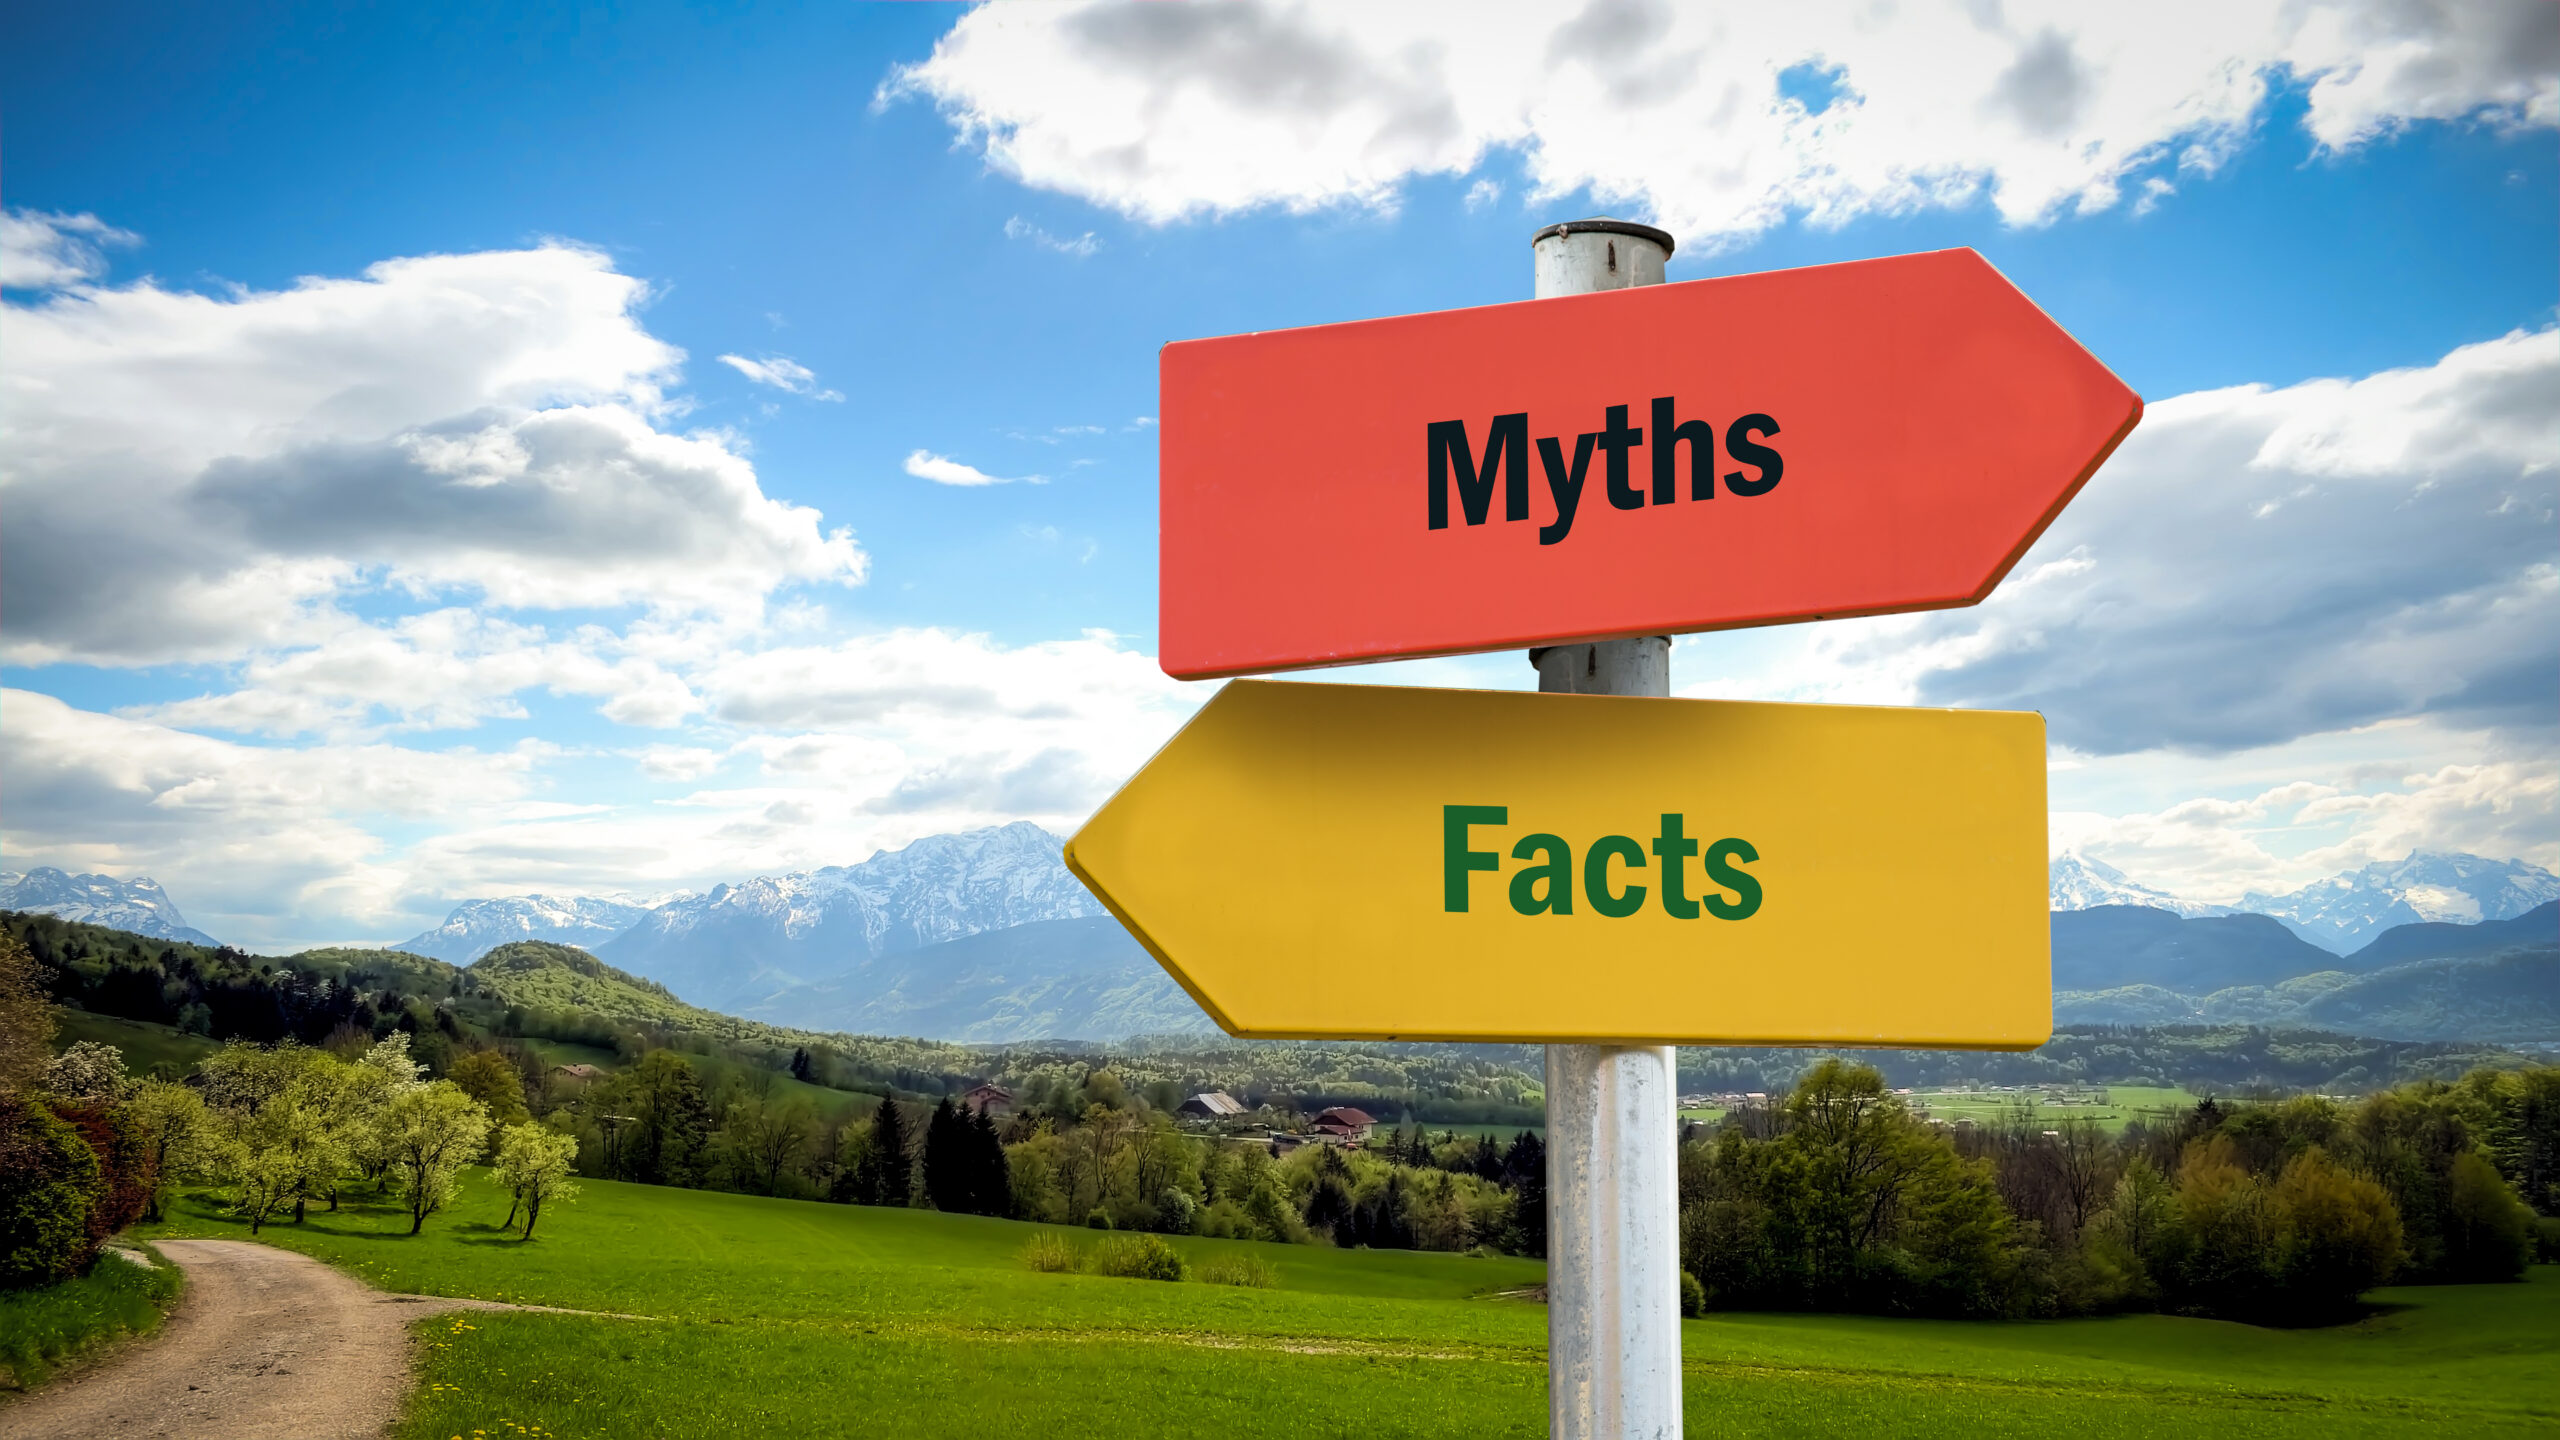 Street Sign to Facts versus Myths with green field, trees, and mountains in the background